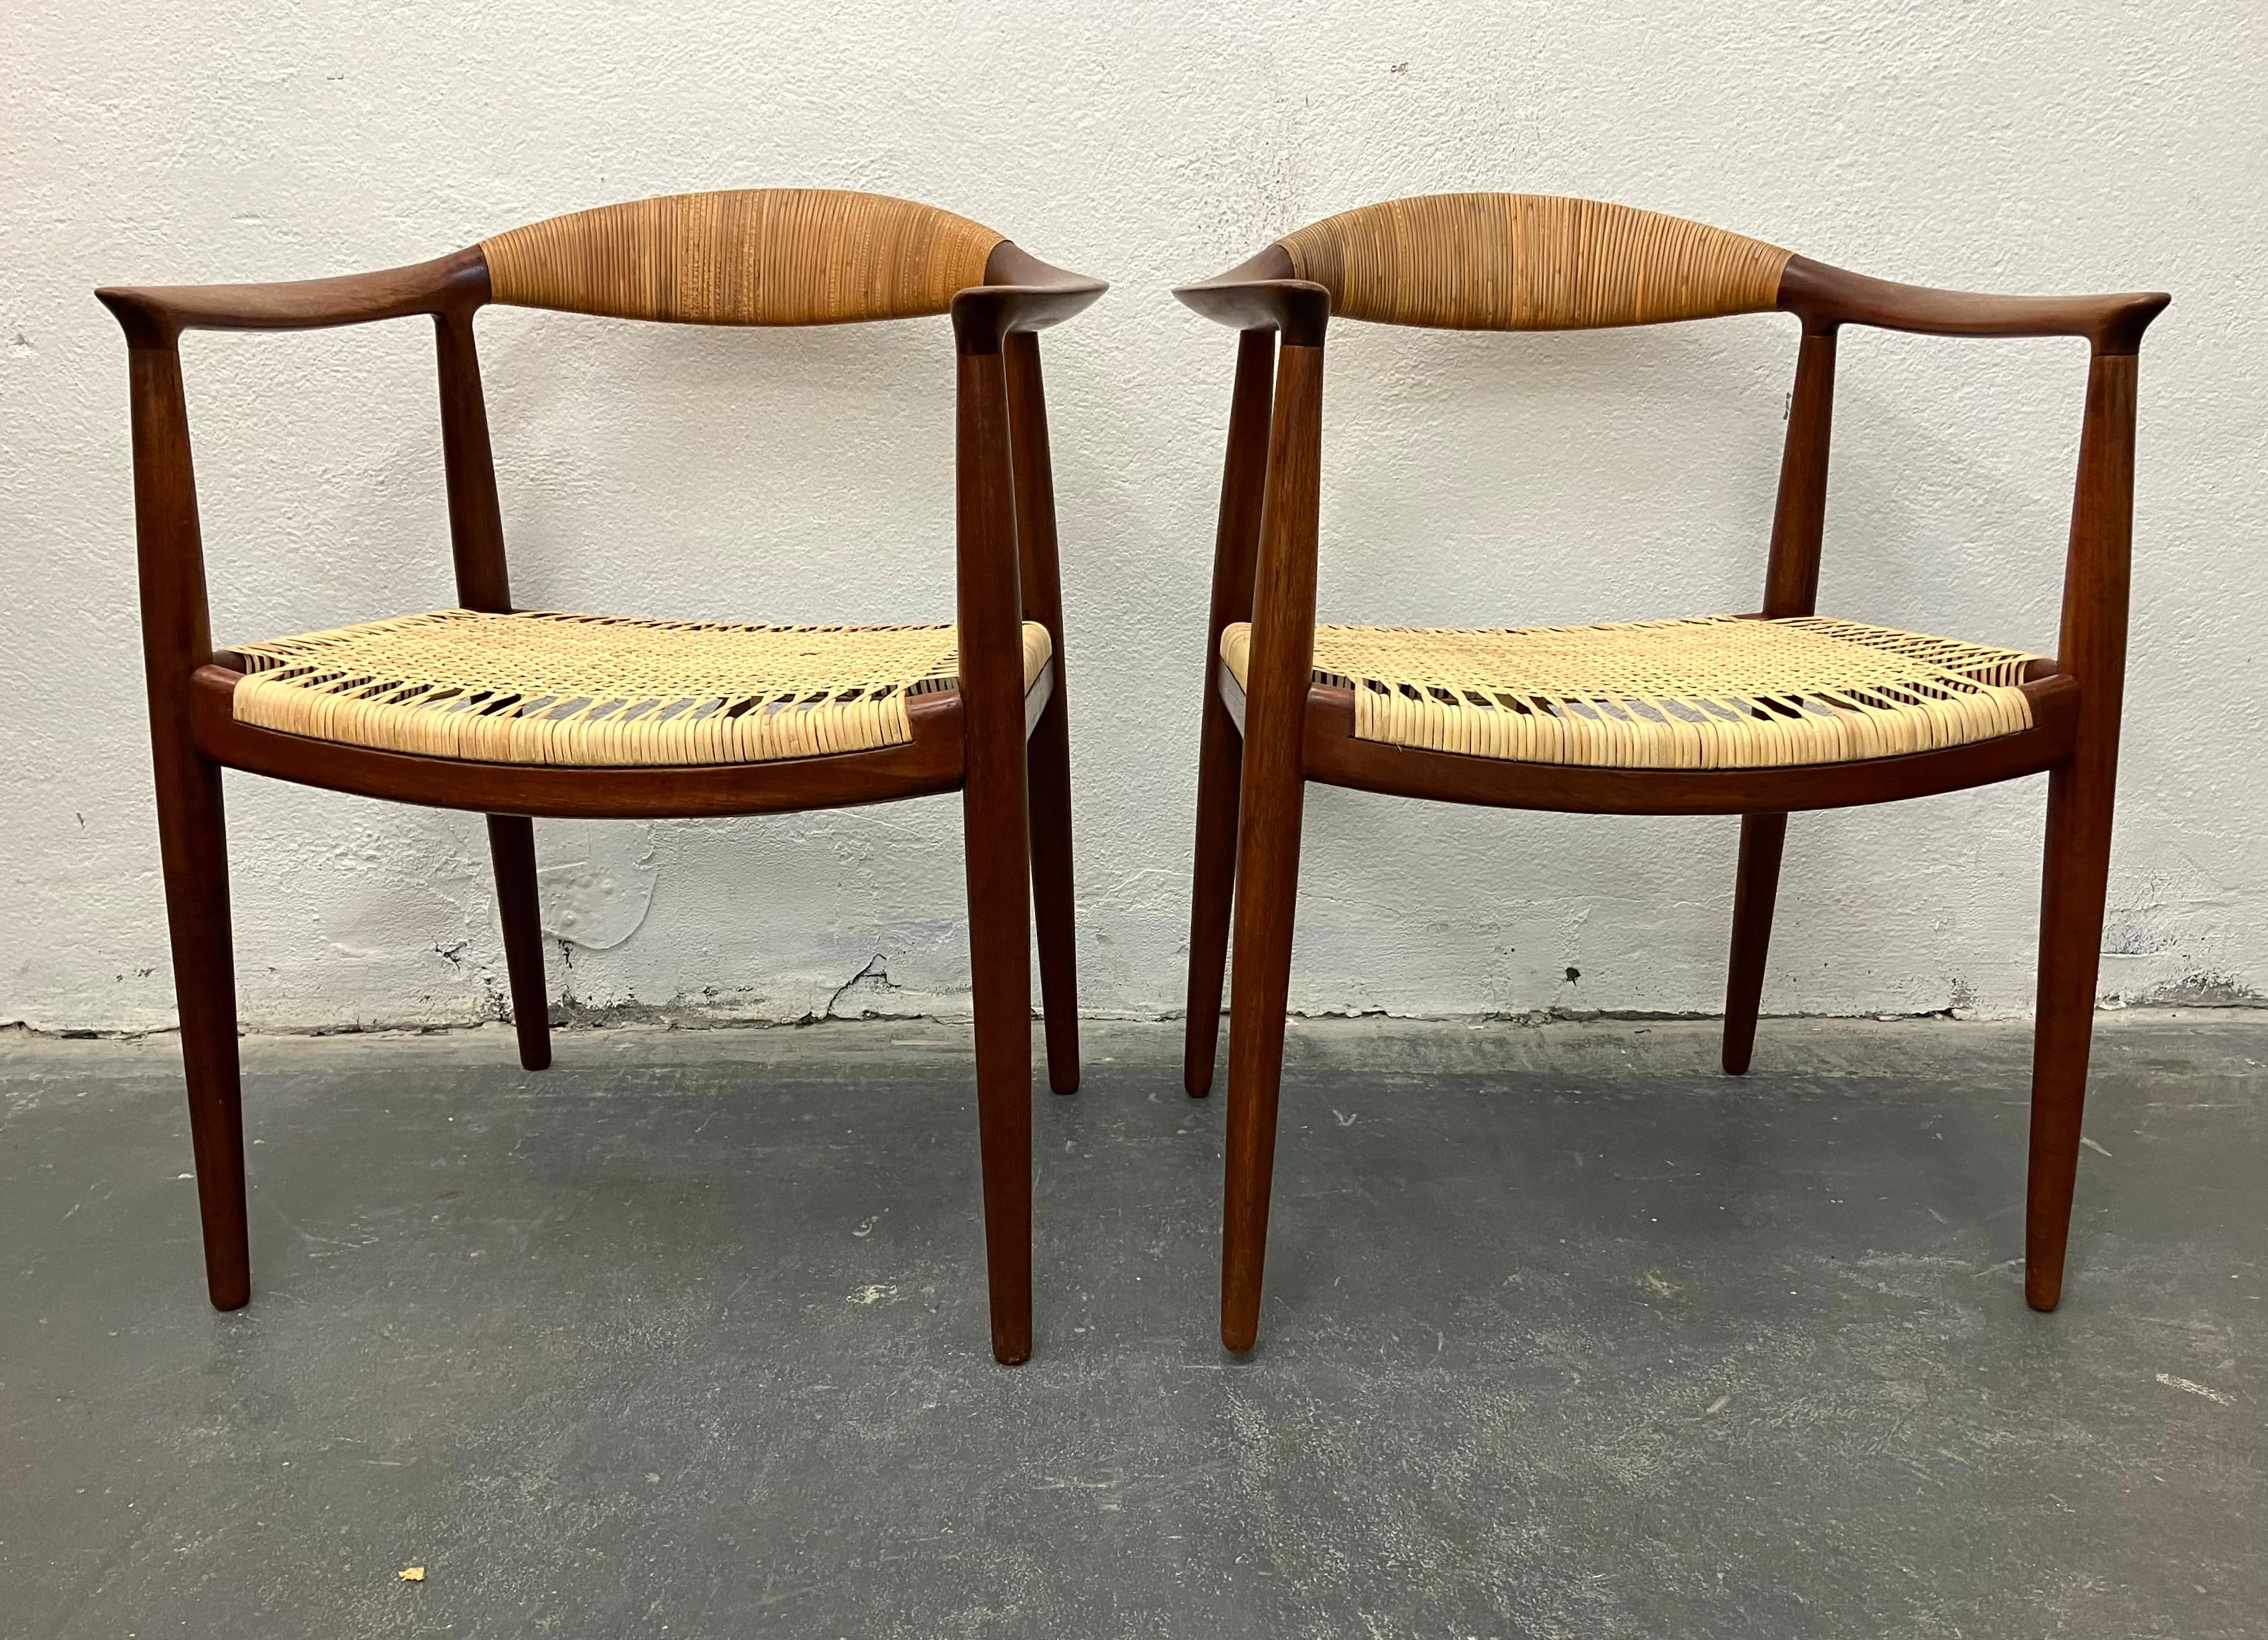 Classic  JH-501 teak arm chairs with cane seats. This is an especially beautiiful and early pair. The color of the wood and cane on the backs has aged so wonderfully that we have left it all original, beyond a light cleaning. The cane seats have